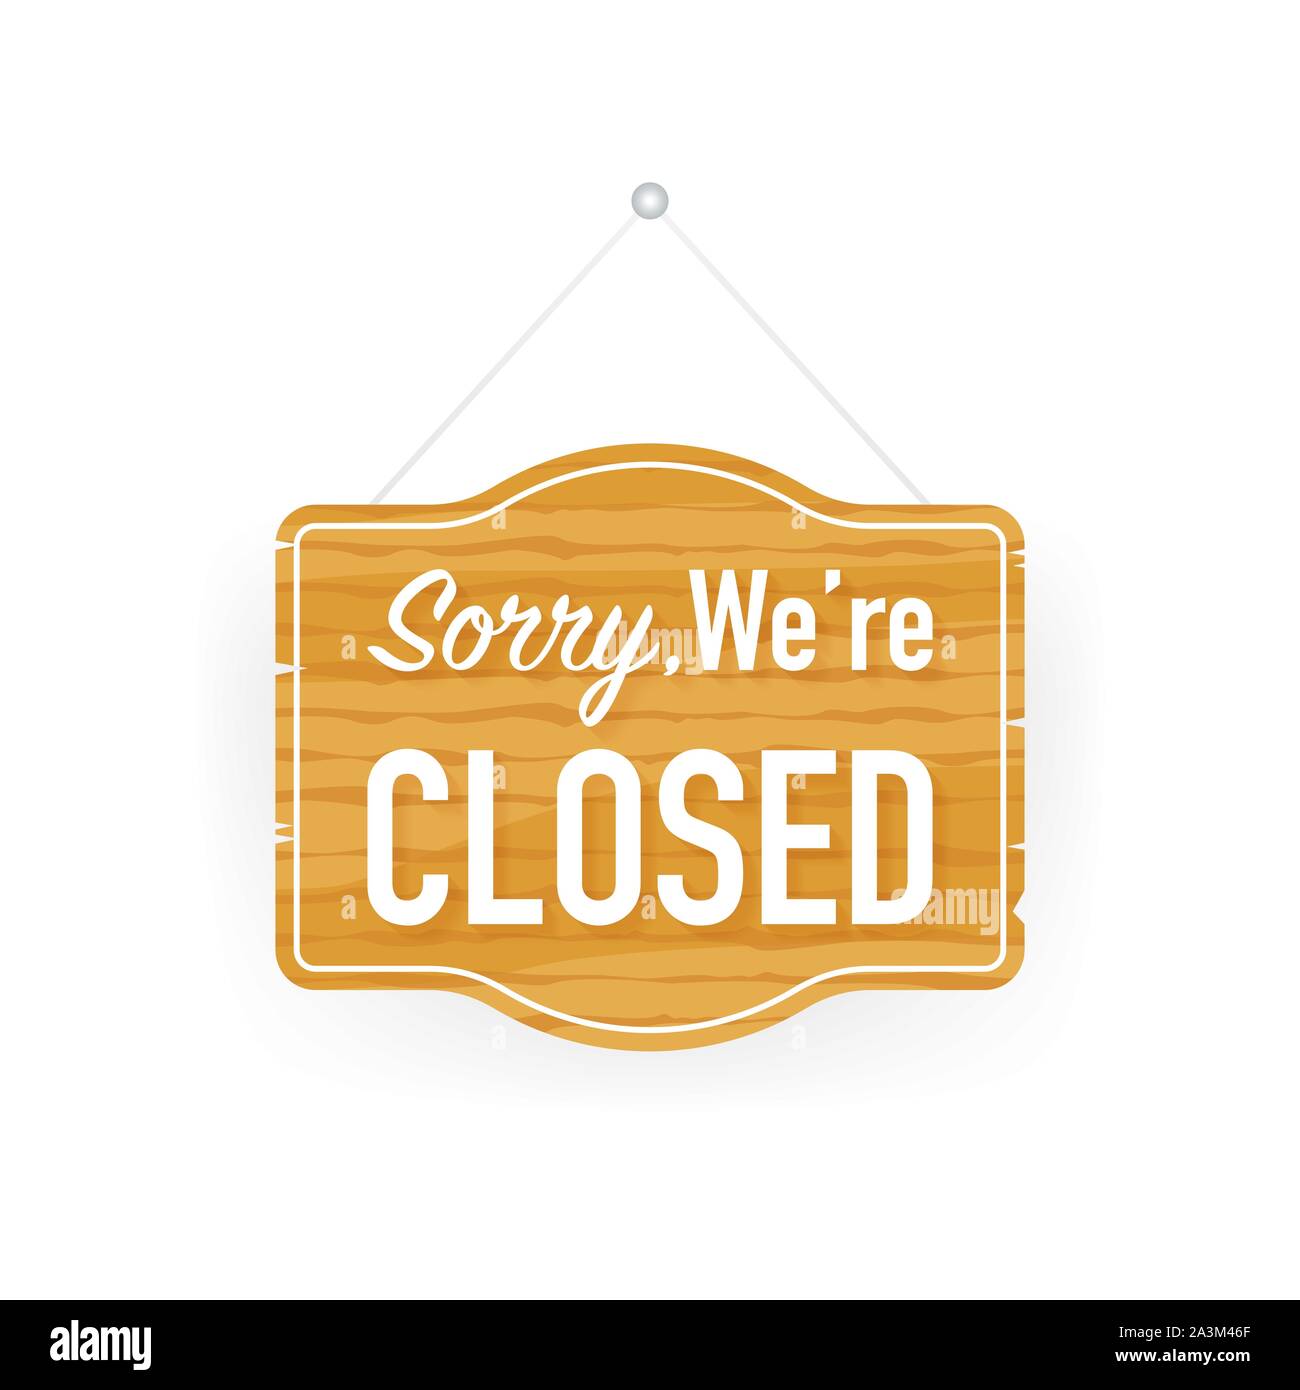 Sorry we're closed hanging sign on white background. Sign for door. Vector illustration. Stock Vector